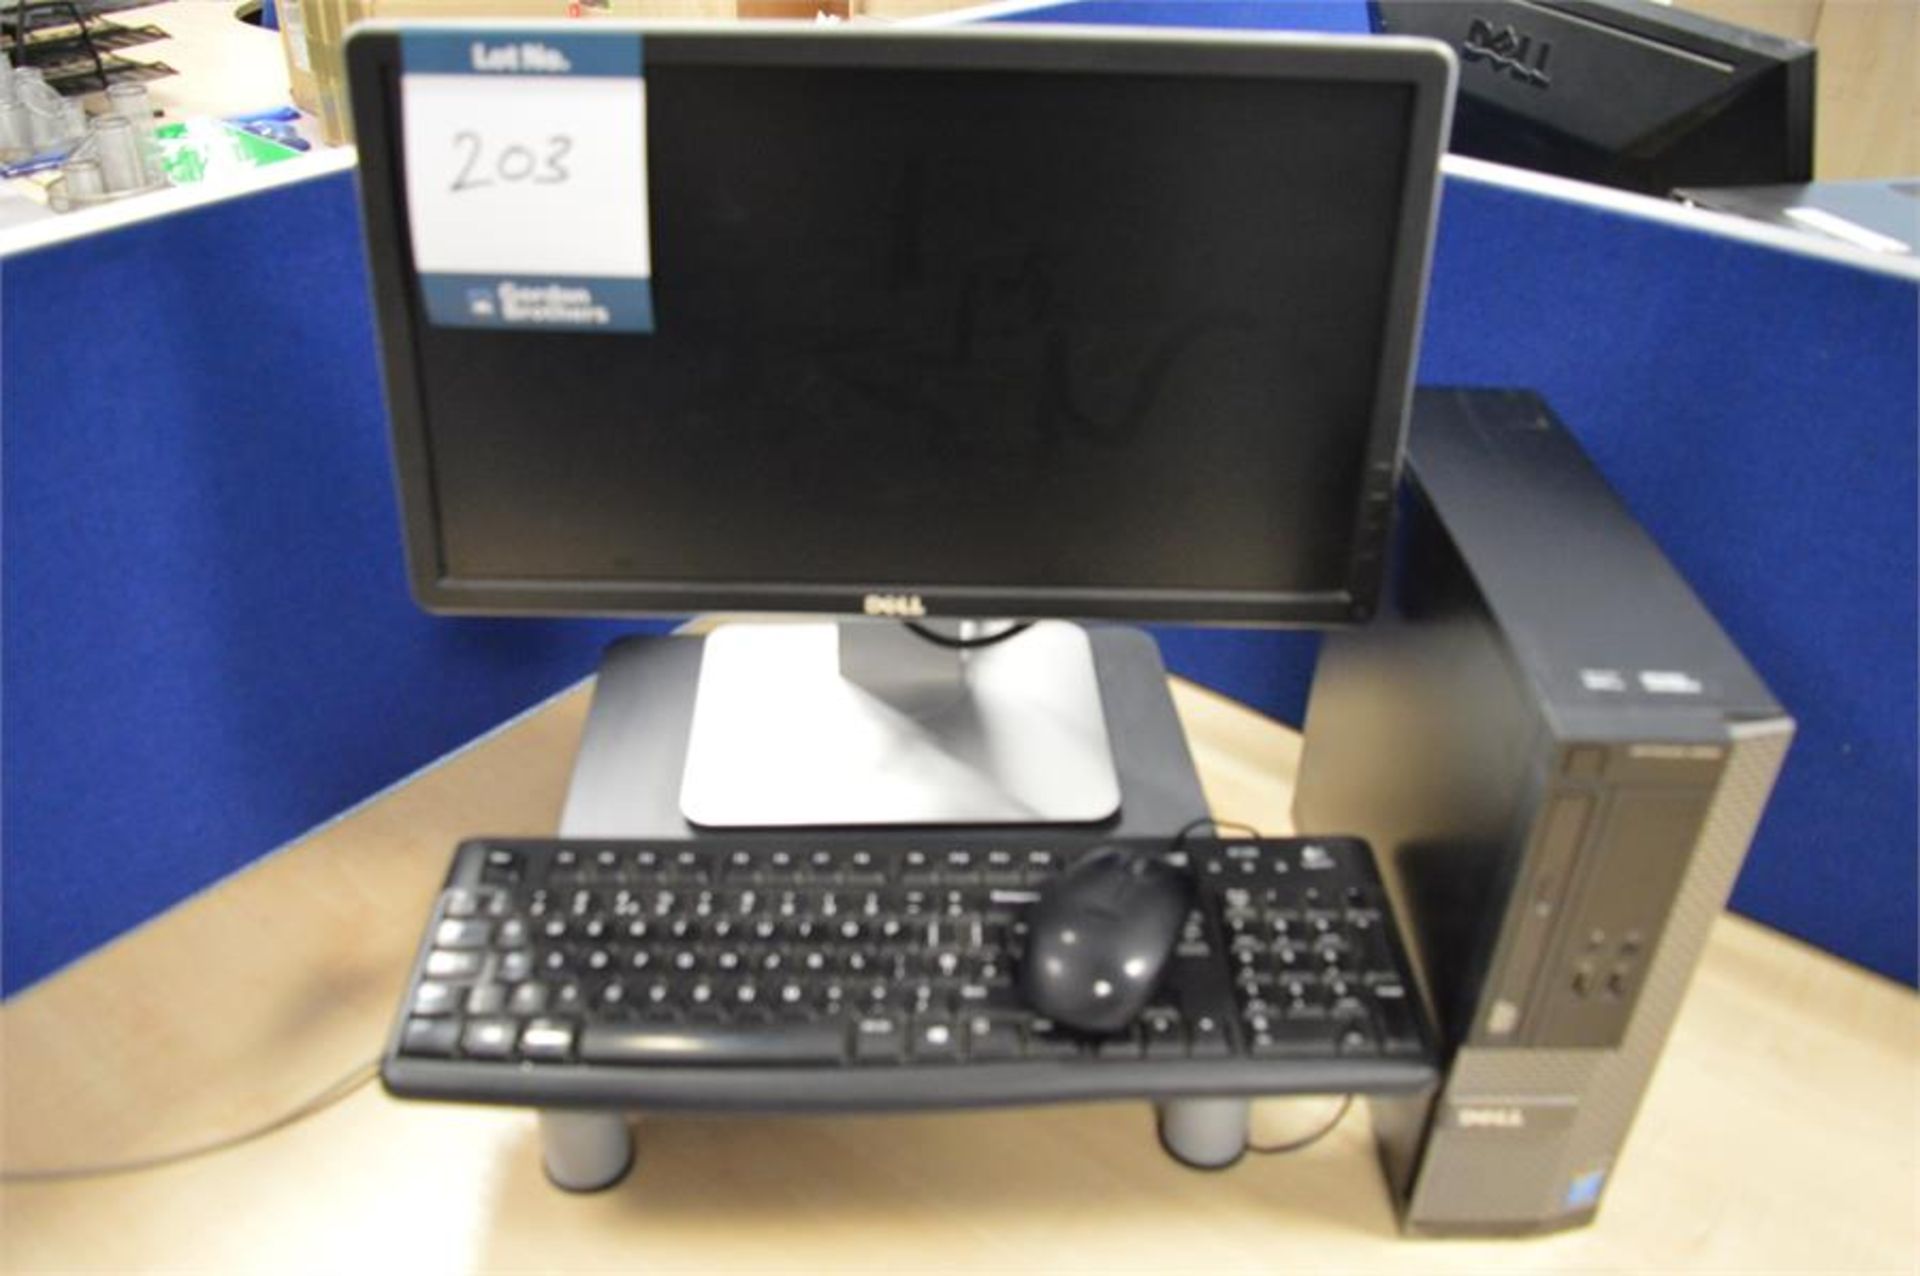 Dell, Optiplex 3020 Core i3 PC with Dell flat screen monitor, keyboard and mouse